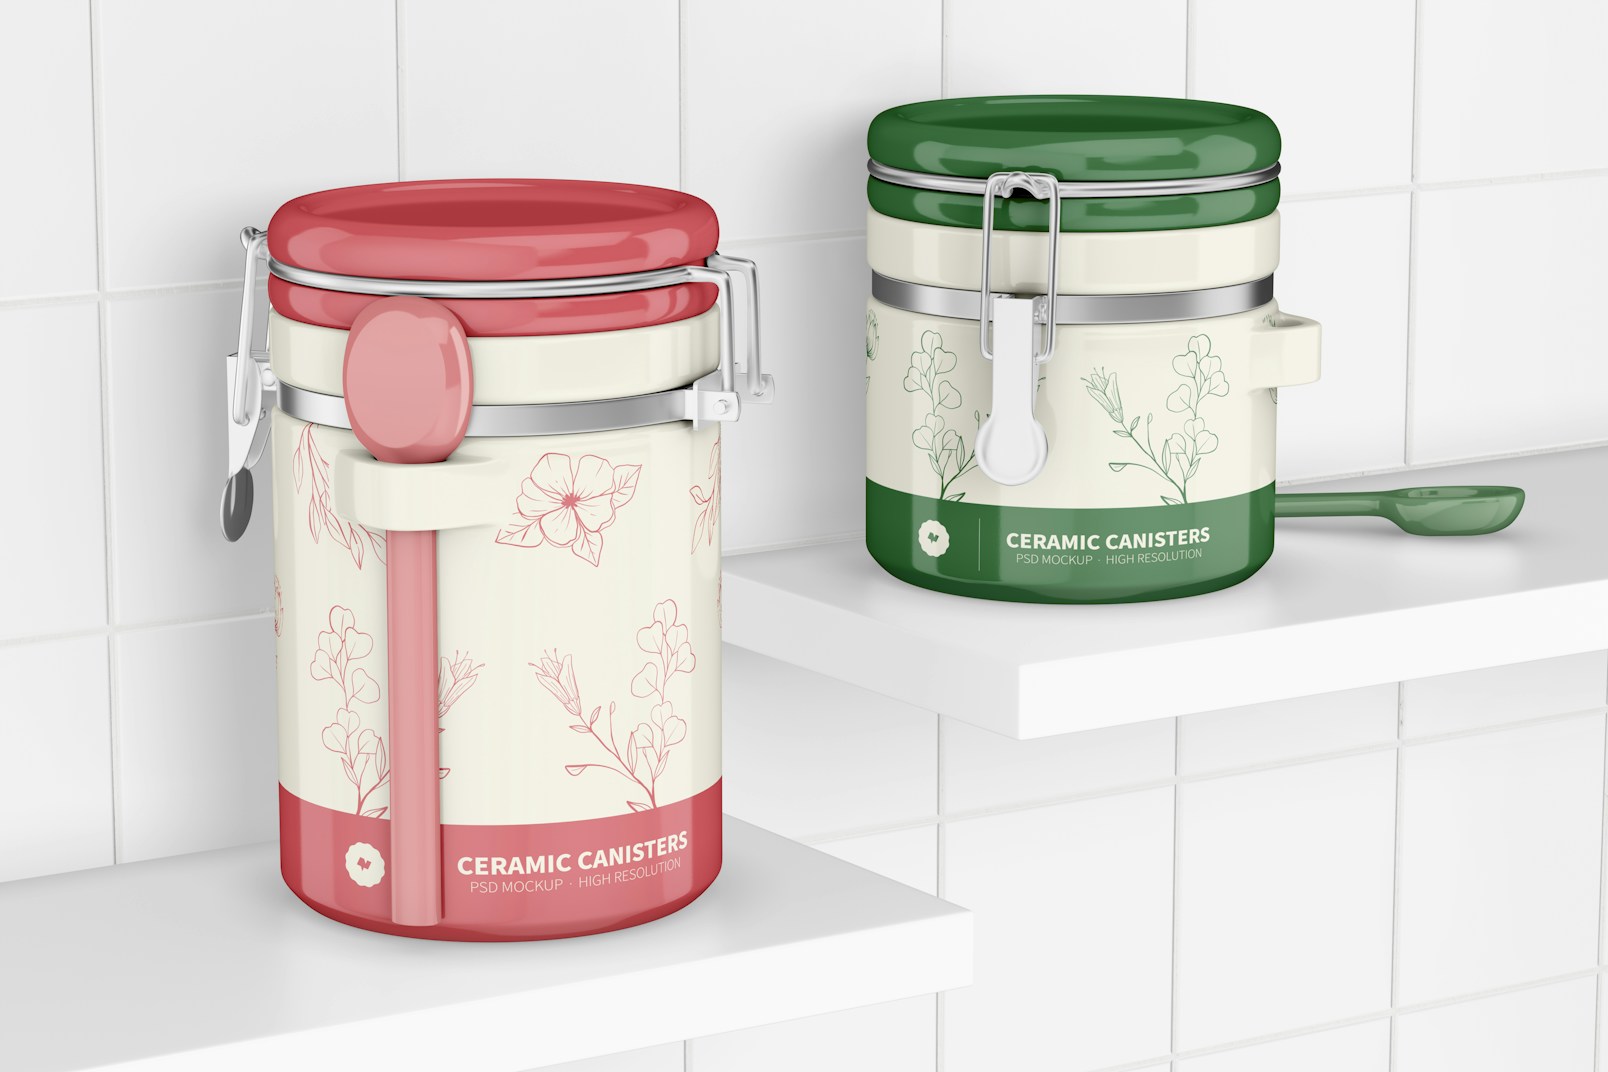 Ceramic Canisters with Spoon in Stand Mockup